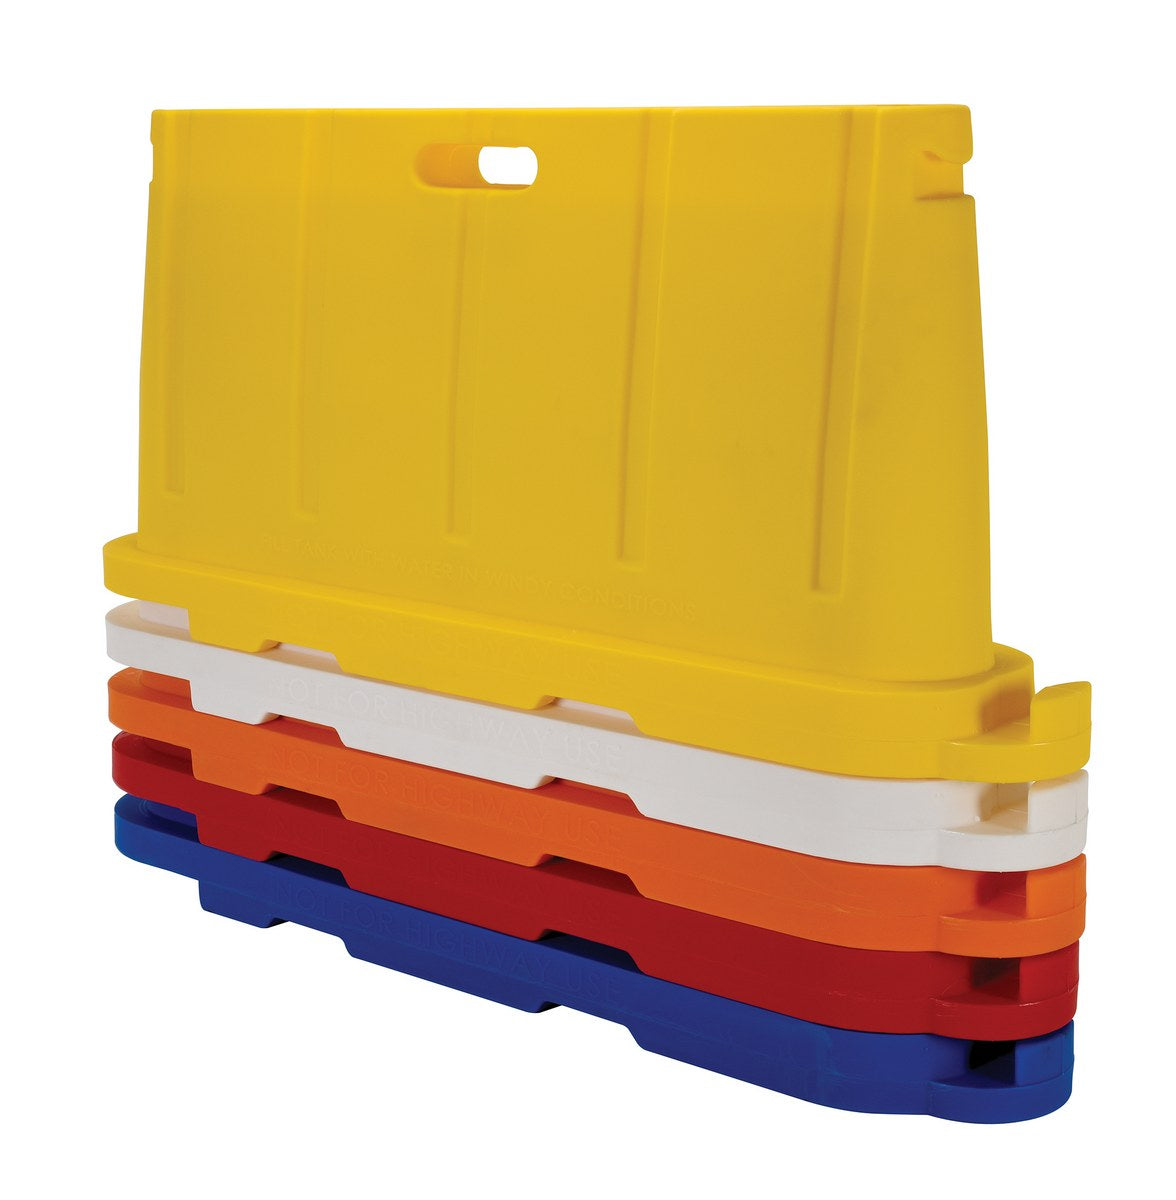 STACKABLE POLY BARRICADE BLUE - Model BCD-7636-BL